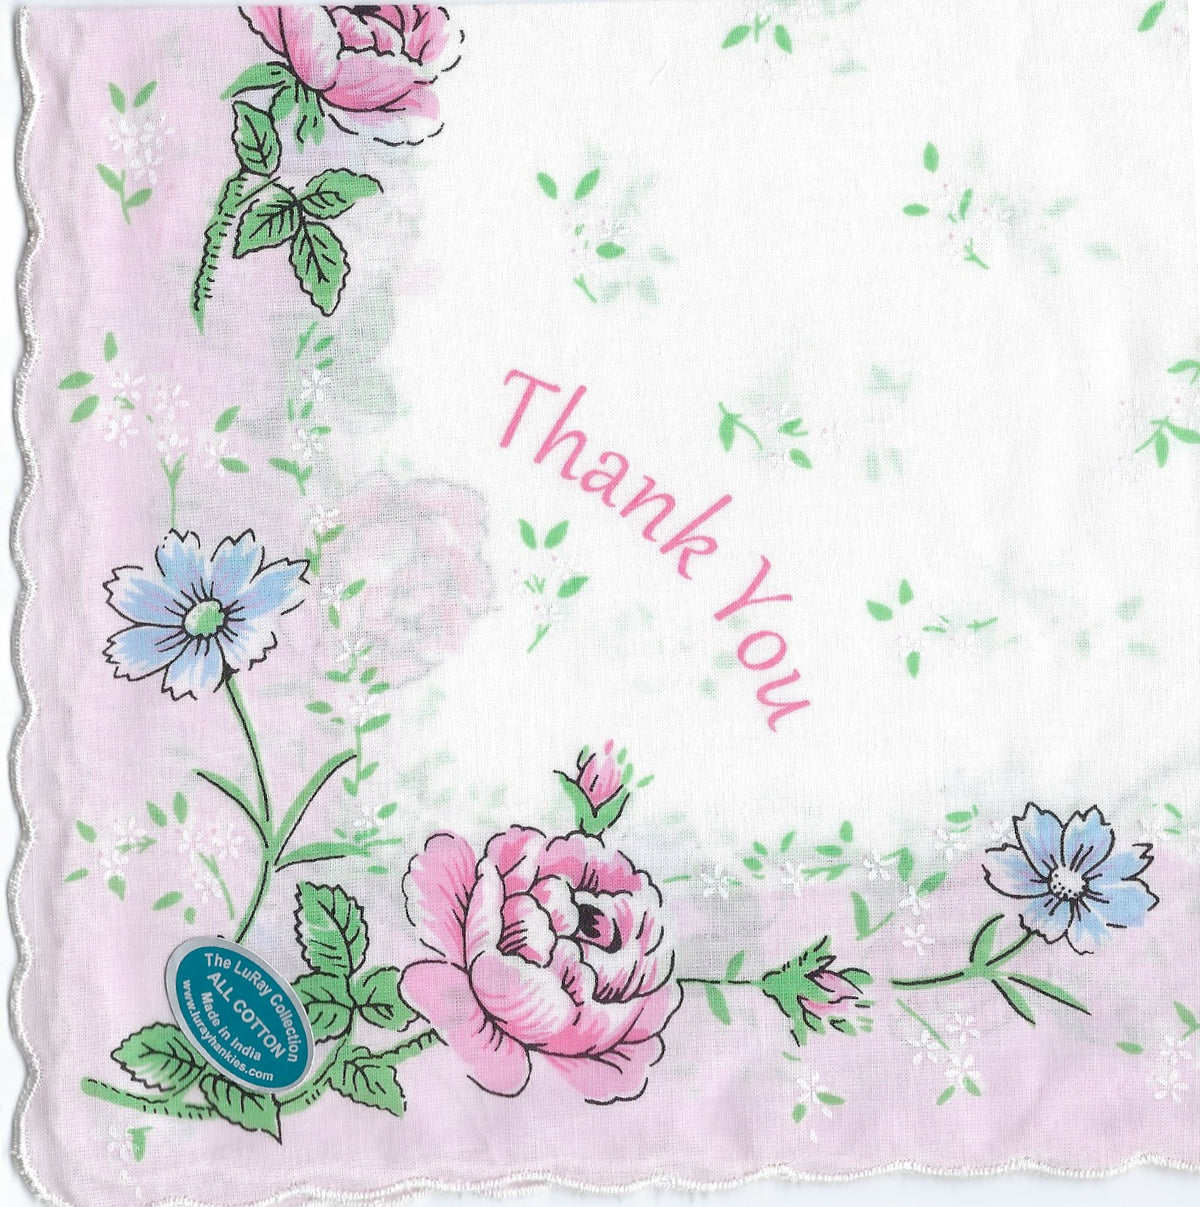 Vintage-Inspired Hanky - Thank You Hanky